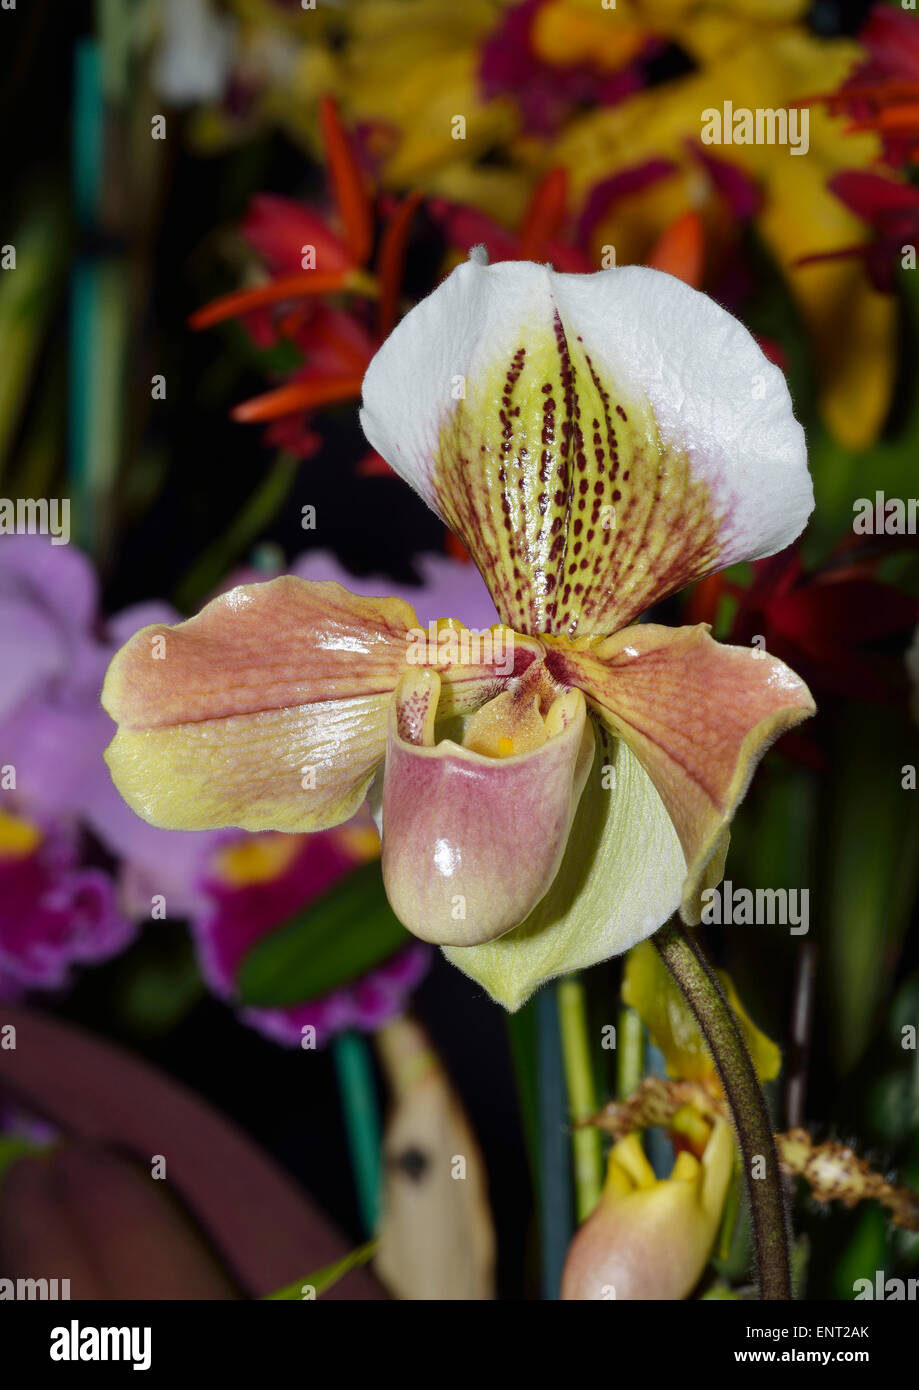 Slipper Orchid - Paphiopedilum Hybrid Exotic flower at show Stock Photo